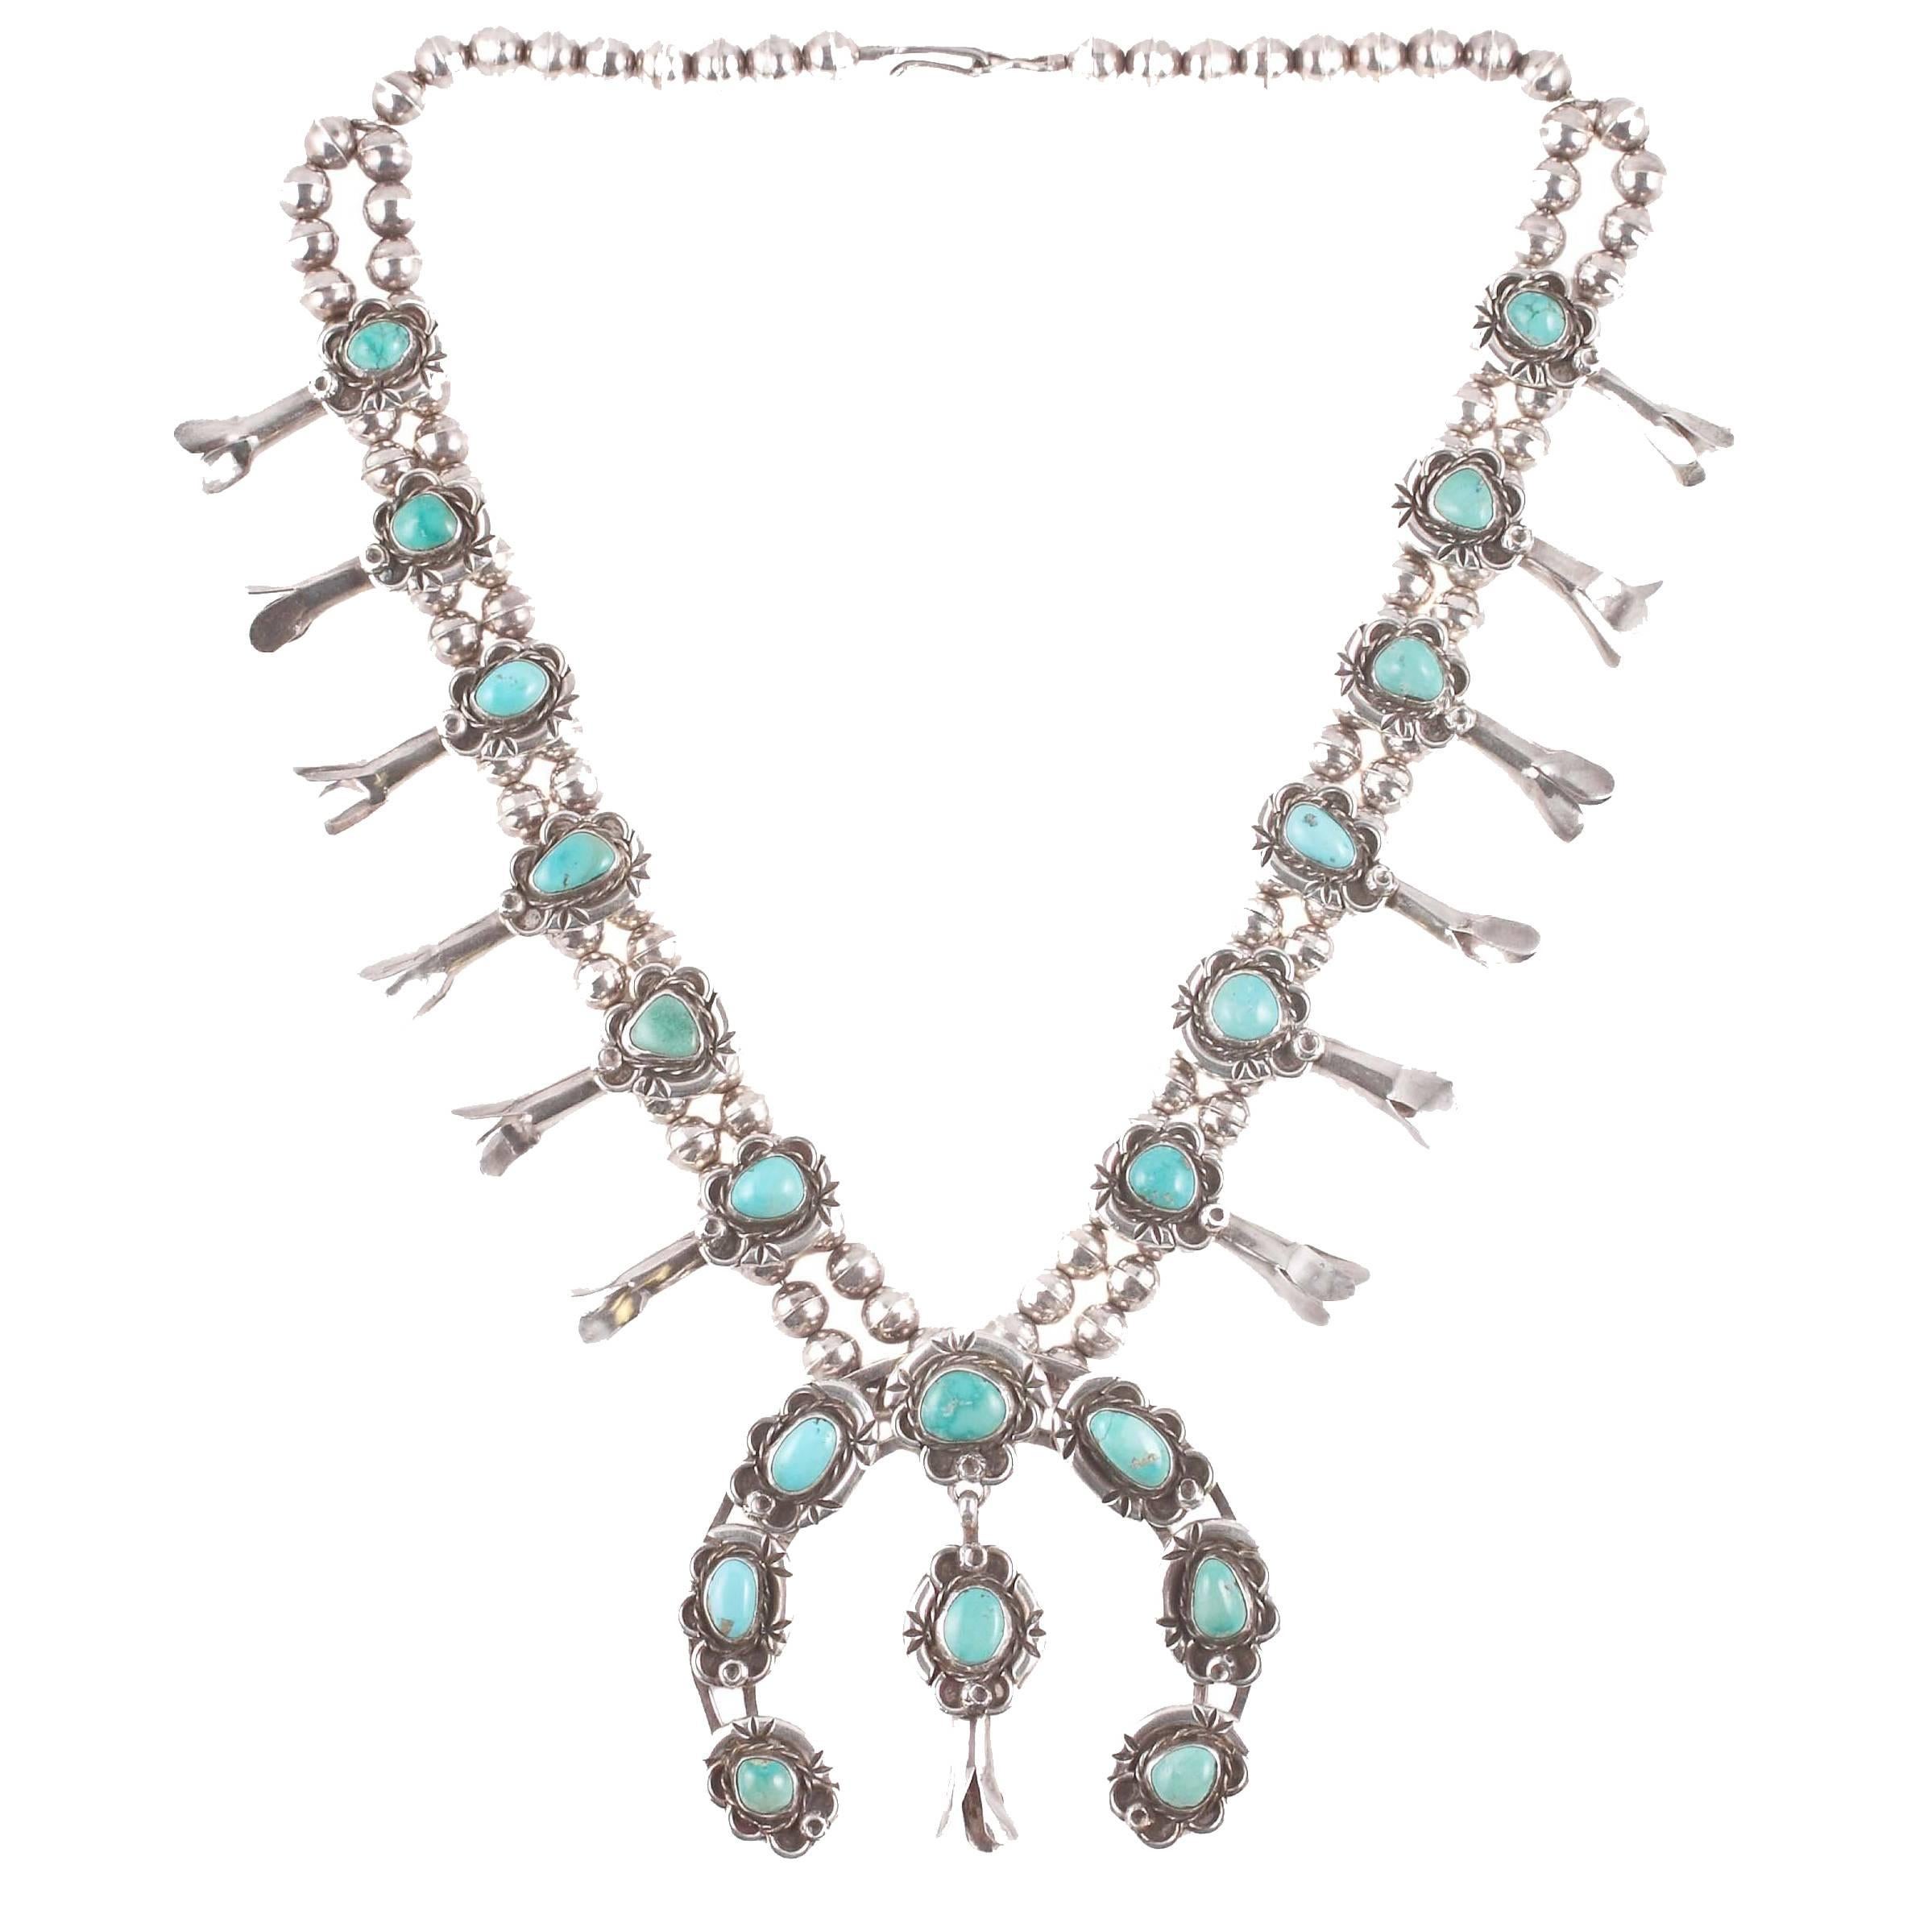 Silver Squash Blossom turquoise necklace